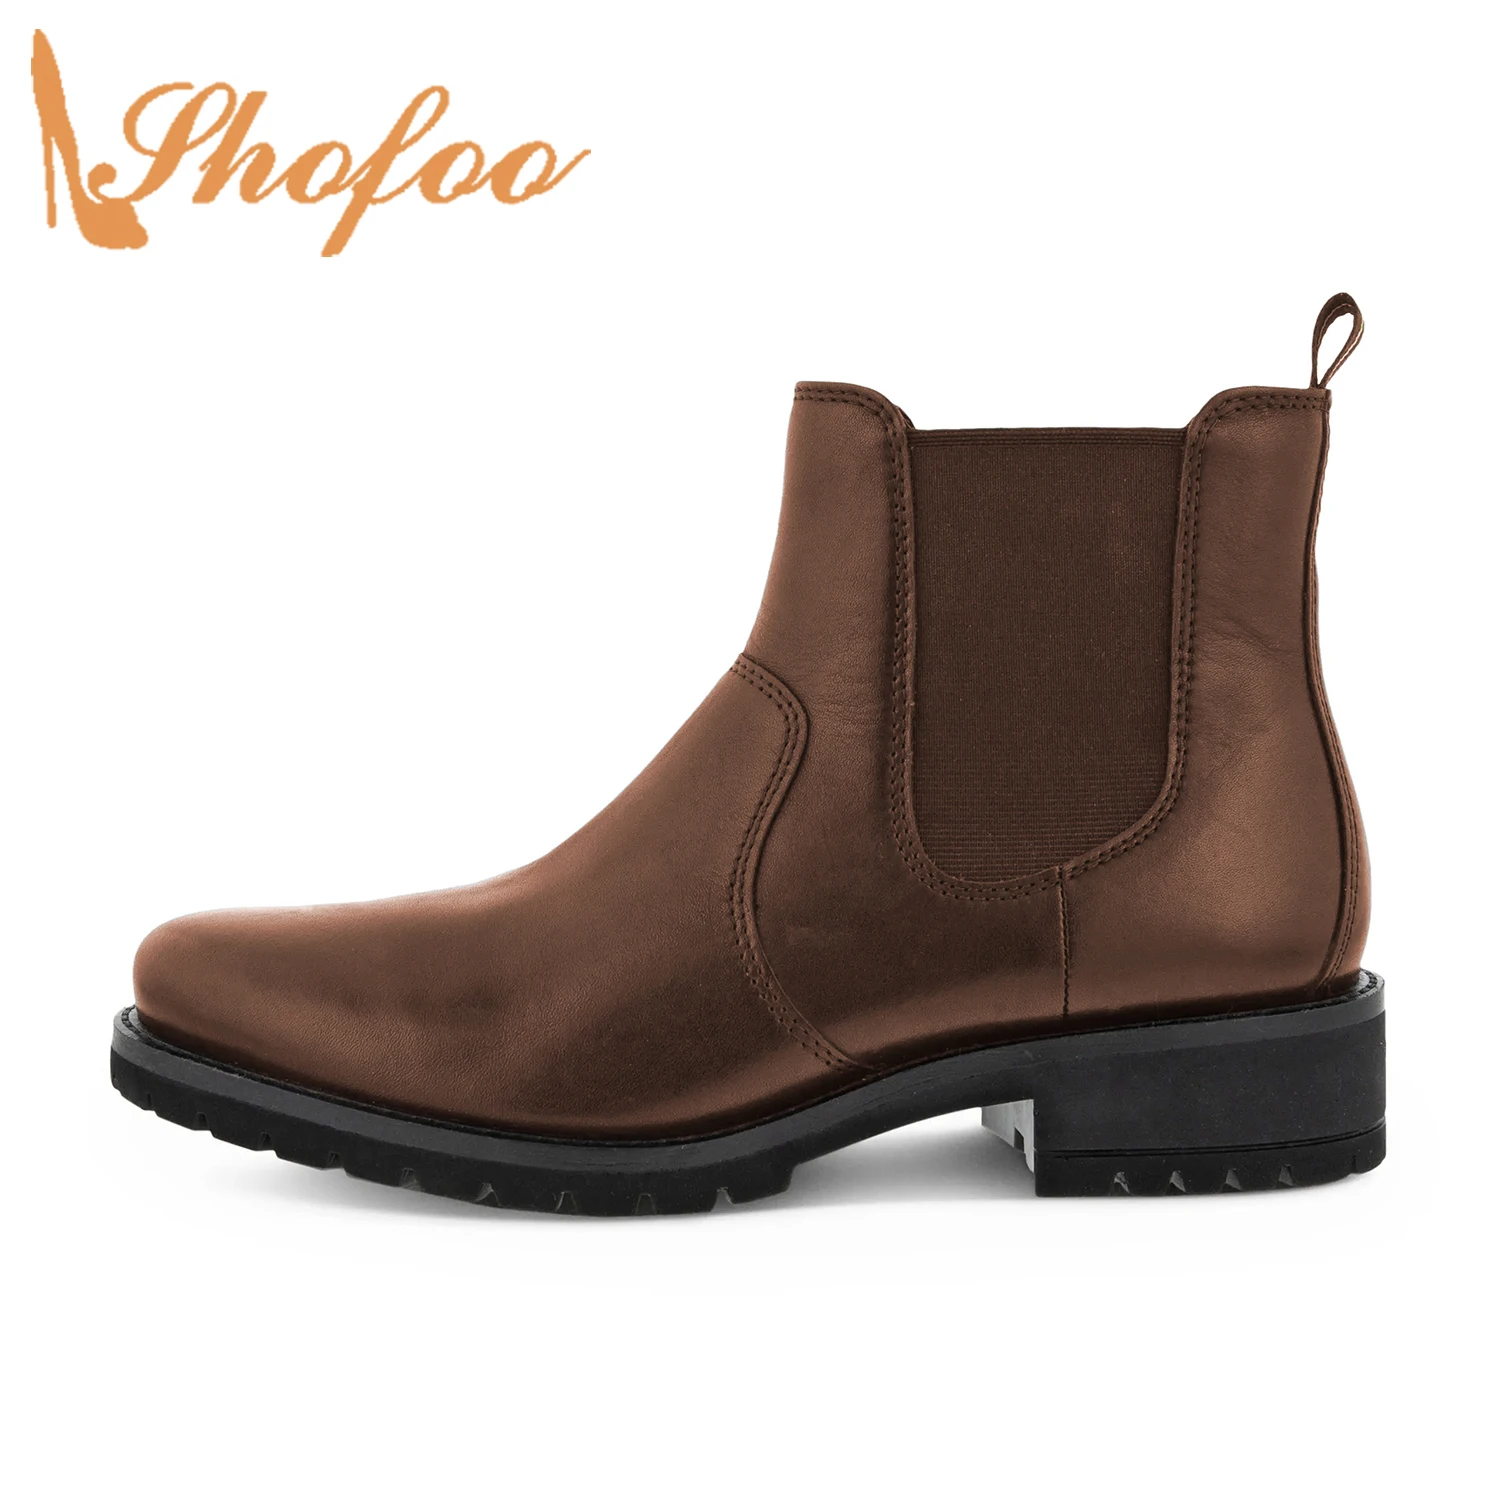 

Brown Low Square Heels Platform Women Ankle Boots Round Toe Chelsea Booties Ladies Winter Mature Shoes Large Size 41 42 Shofoo